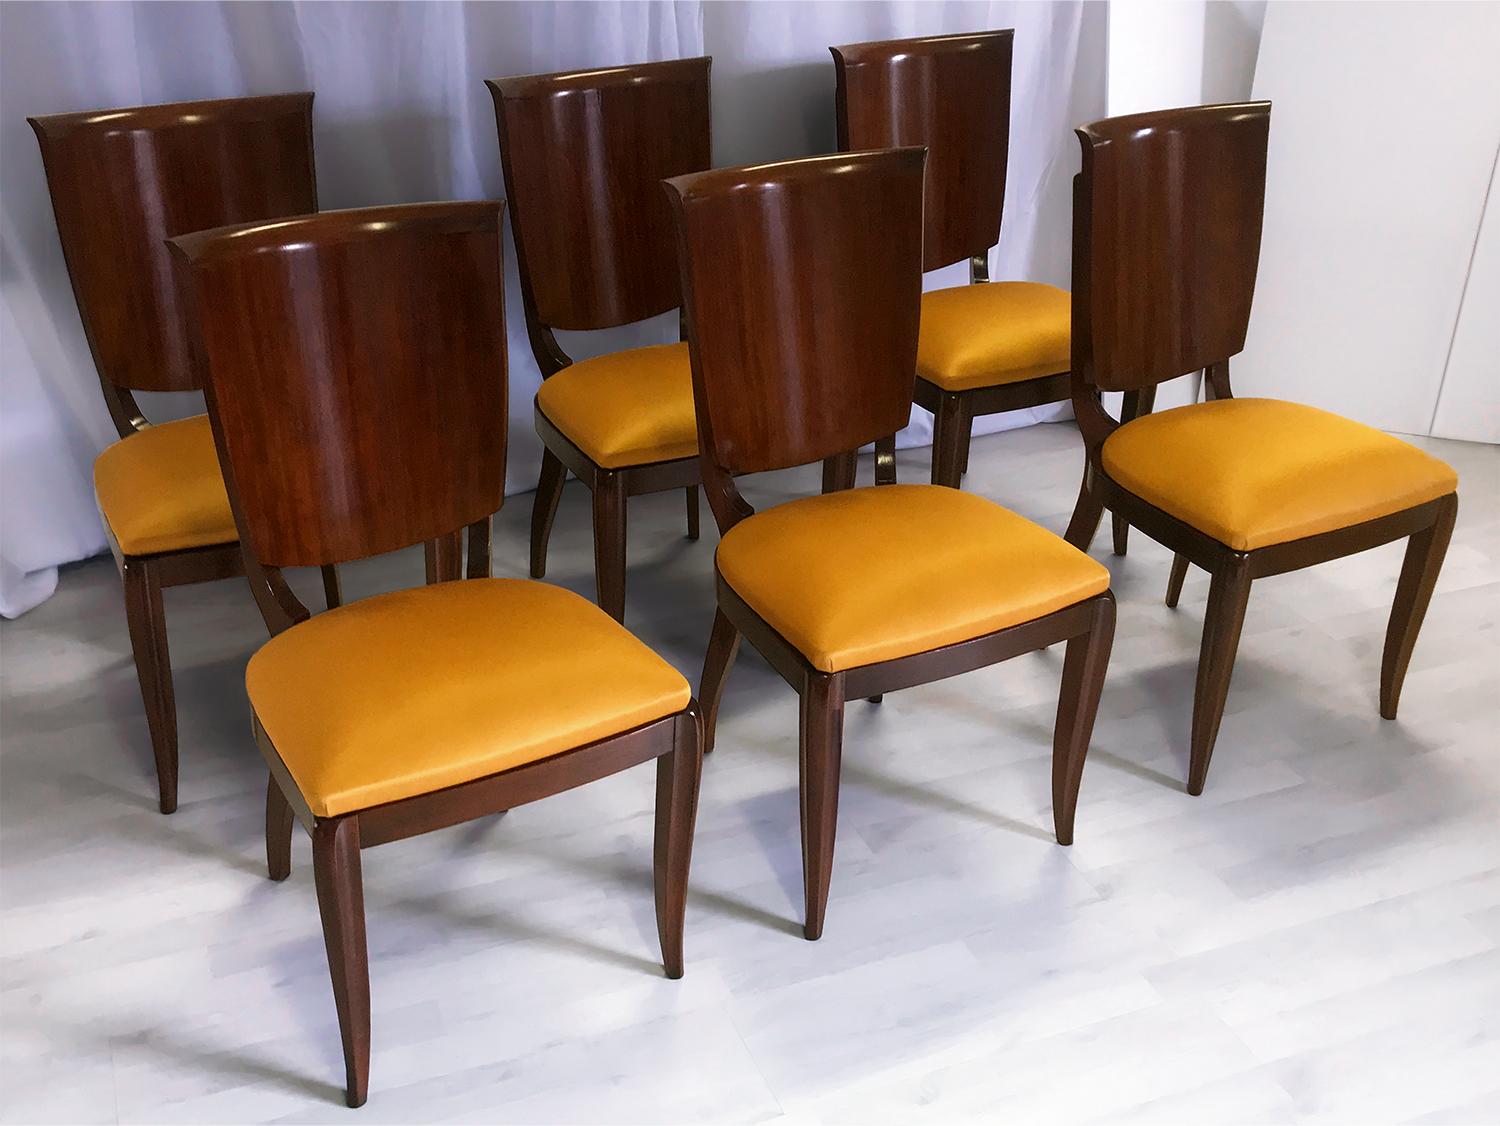 Elegant lines and solid structures for this stunning set of six dining chairs, designed by Vittorio Dassi in the 1950s and all ready-to-use.

Their wooden surfaces have all been polished to shellac recently and are in excellent conditions of the